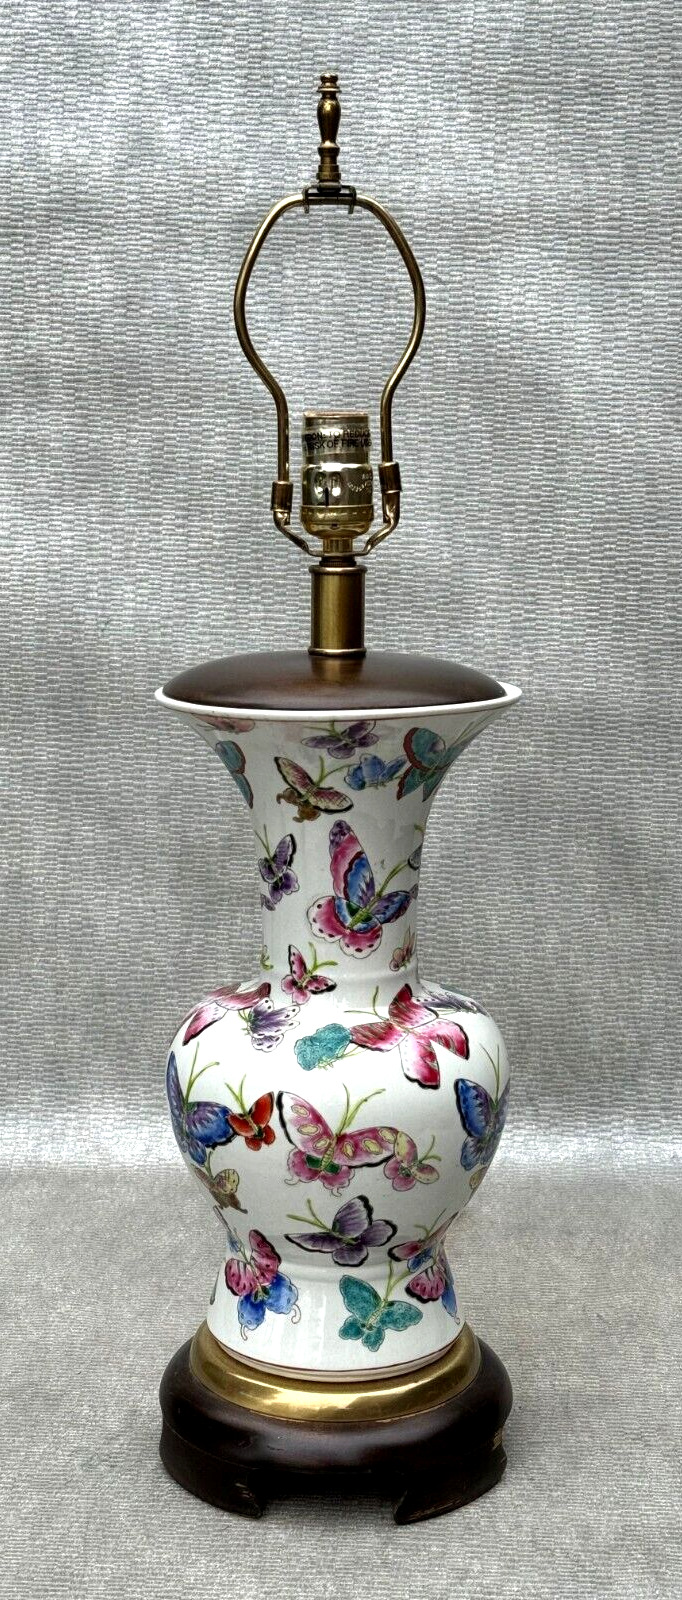 FREDERICK COOPER TABLE LAMP ENAMEL BUTTERFLY BUTTERFLIES COLORFUL ASIAN STYLE